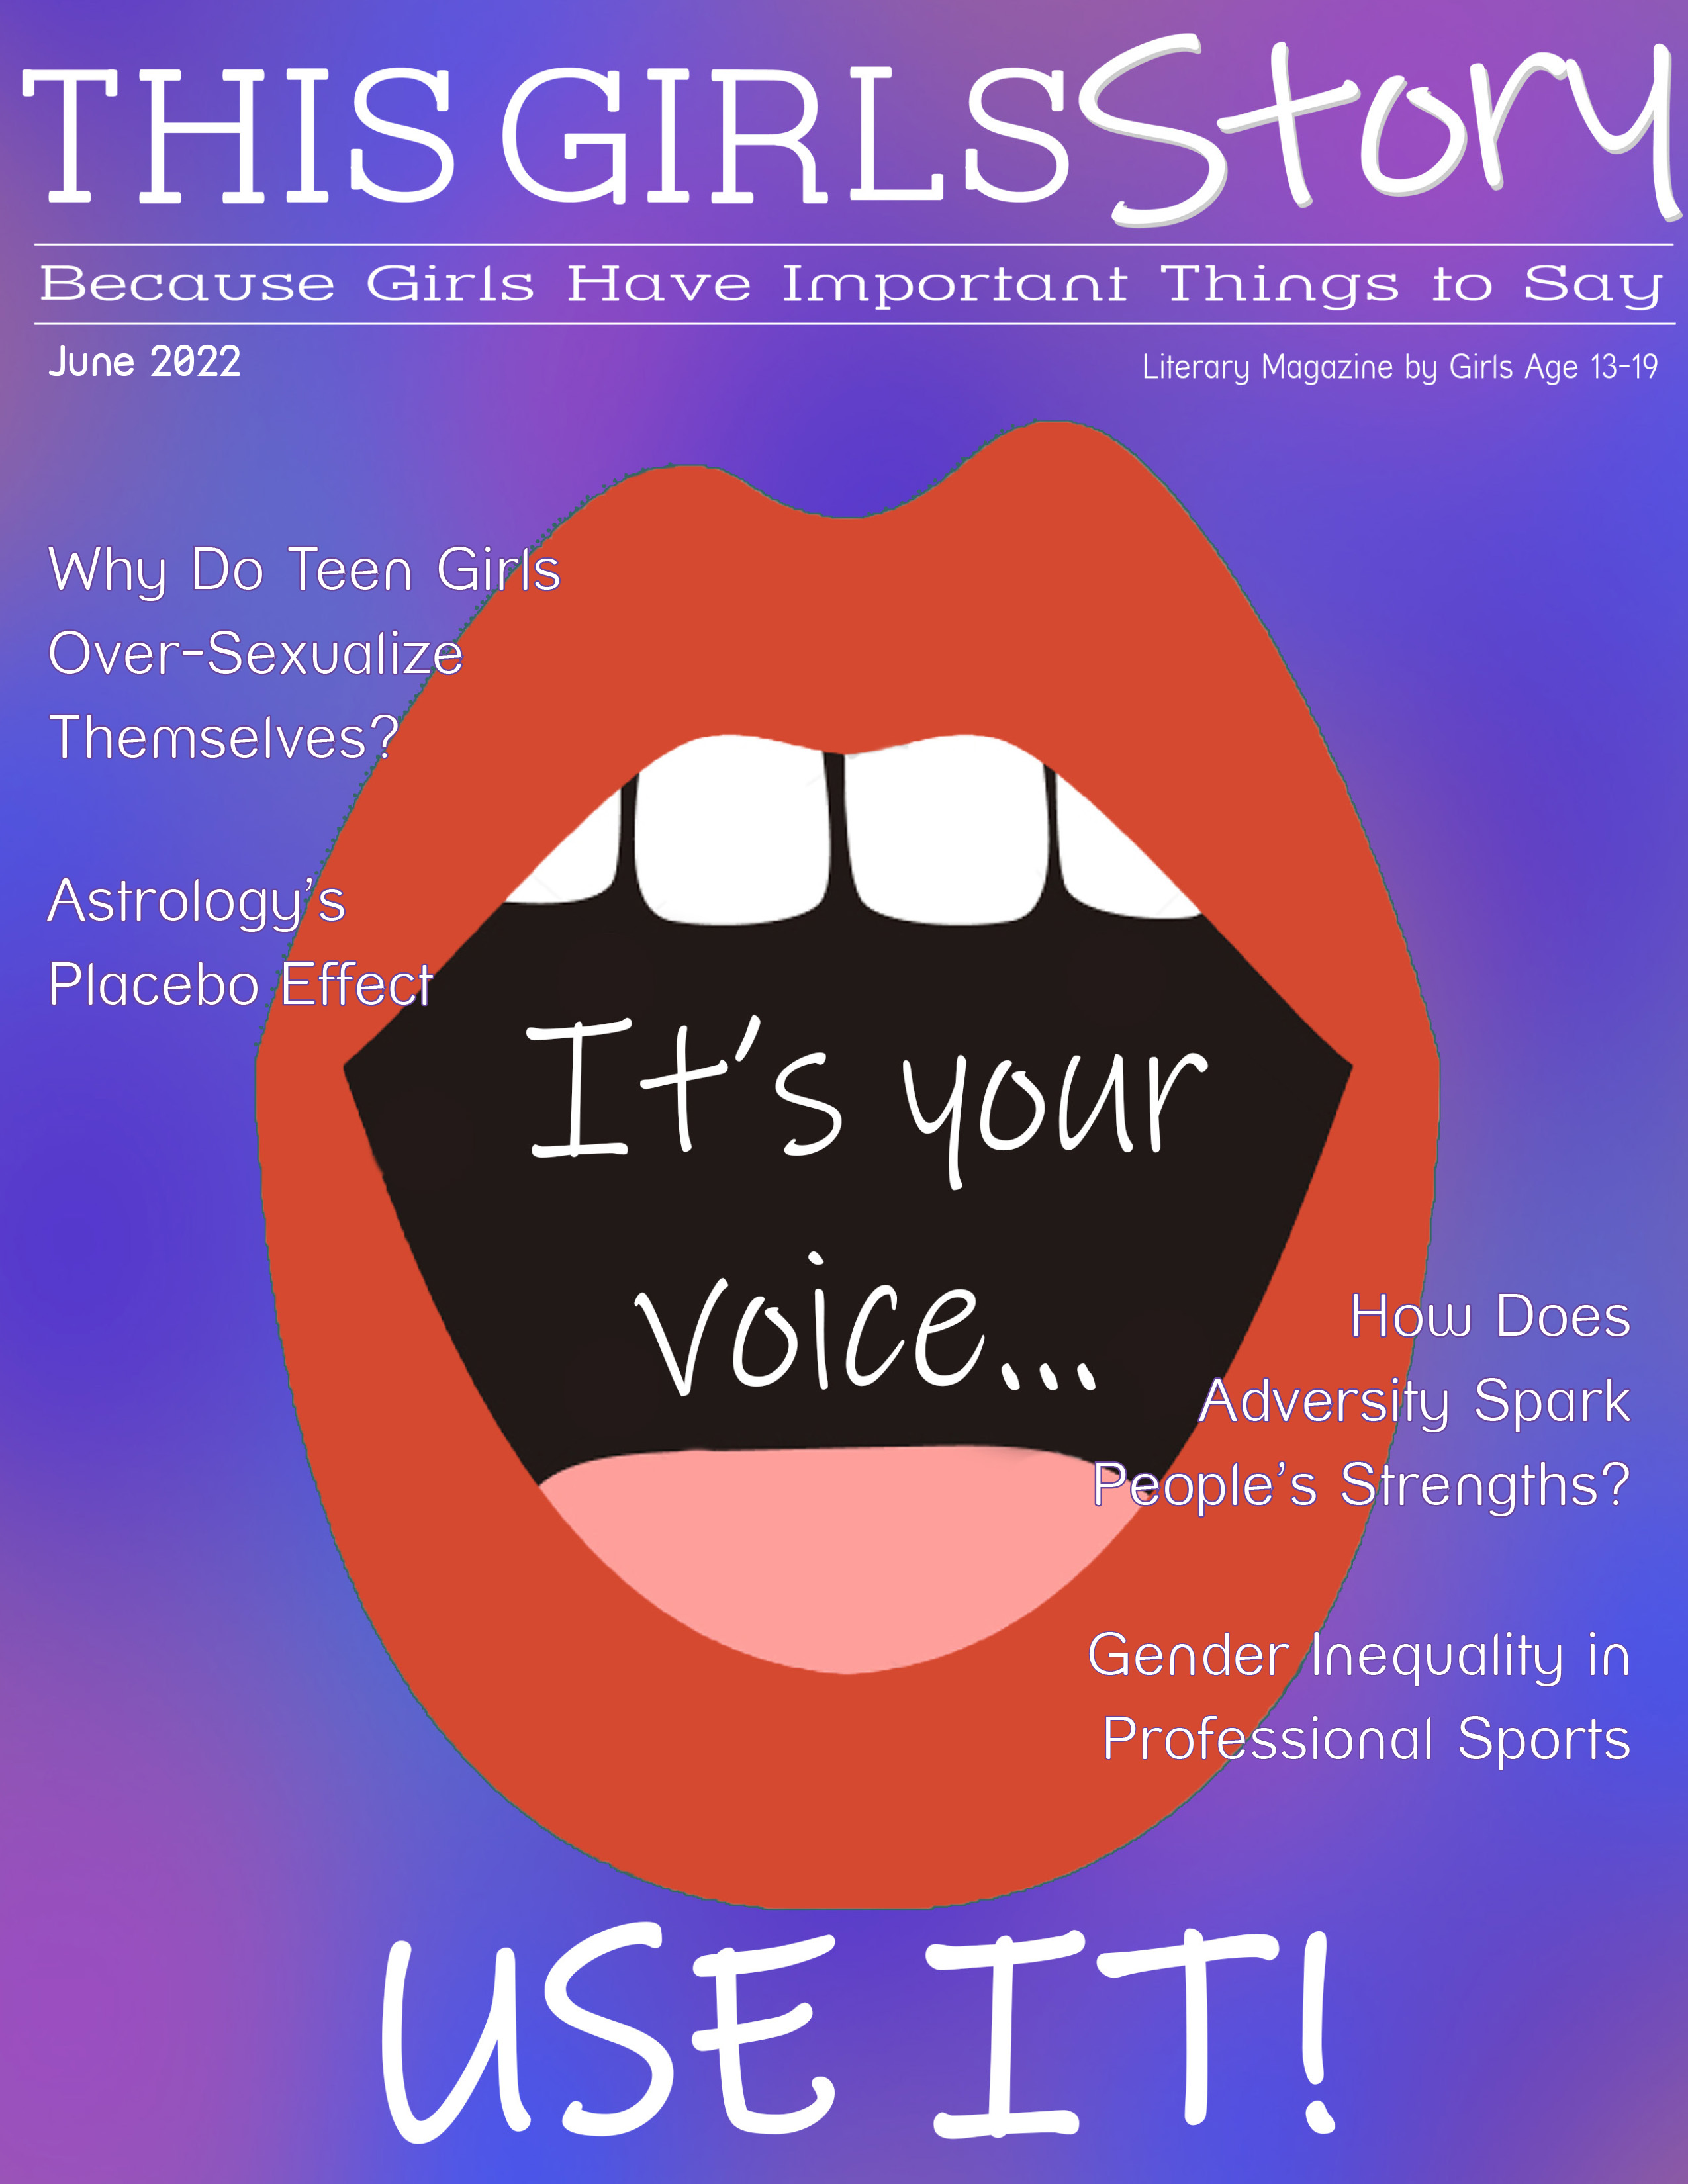 This TGS Digital Magazine - First Issue It's YOUR Voice...Use It! is made with love by This Girls Story! Shop more unique gift ideas today with Spots Initiatives, the best way to support creators.